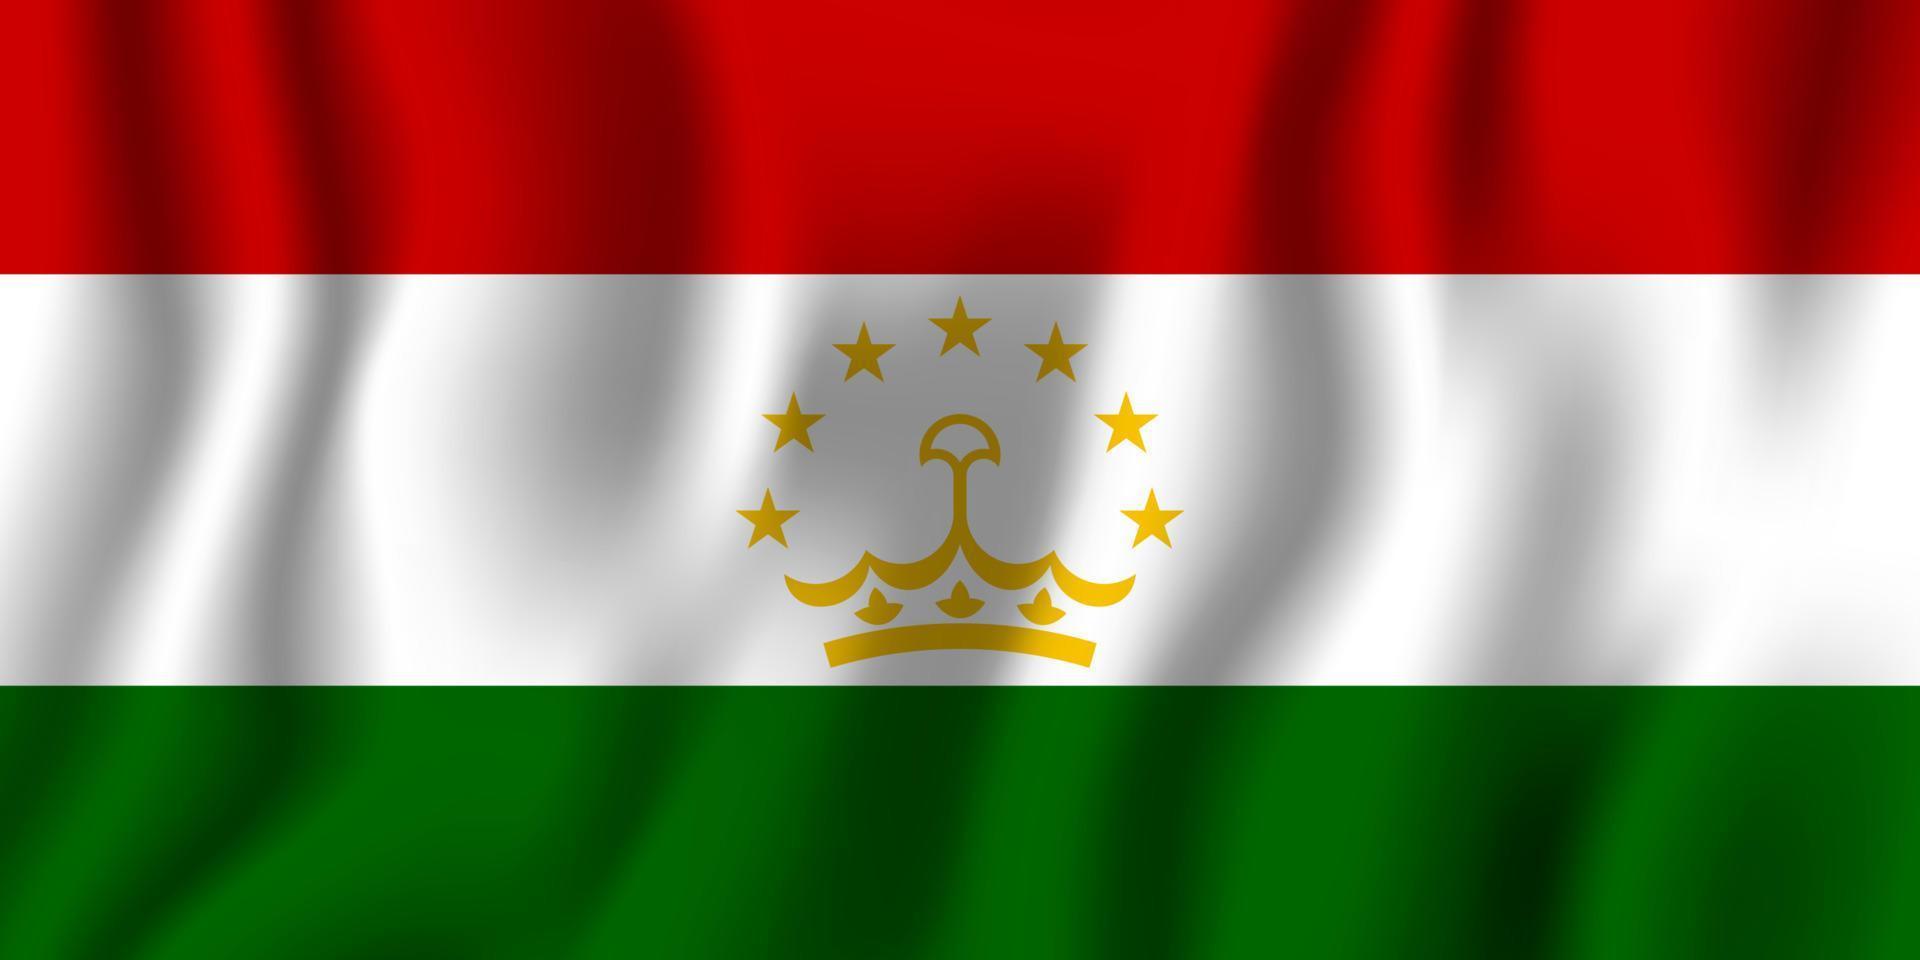 Tajikistan realistic waving flag vector illustration. National country background symbol. Independence day